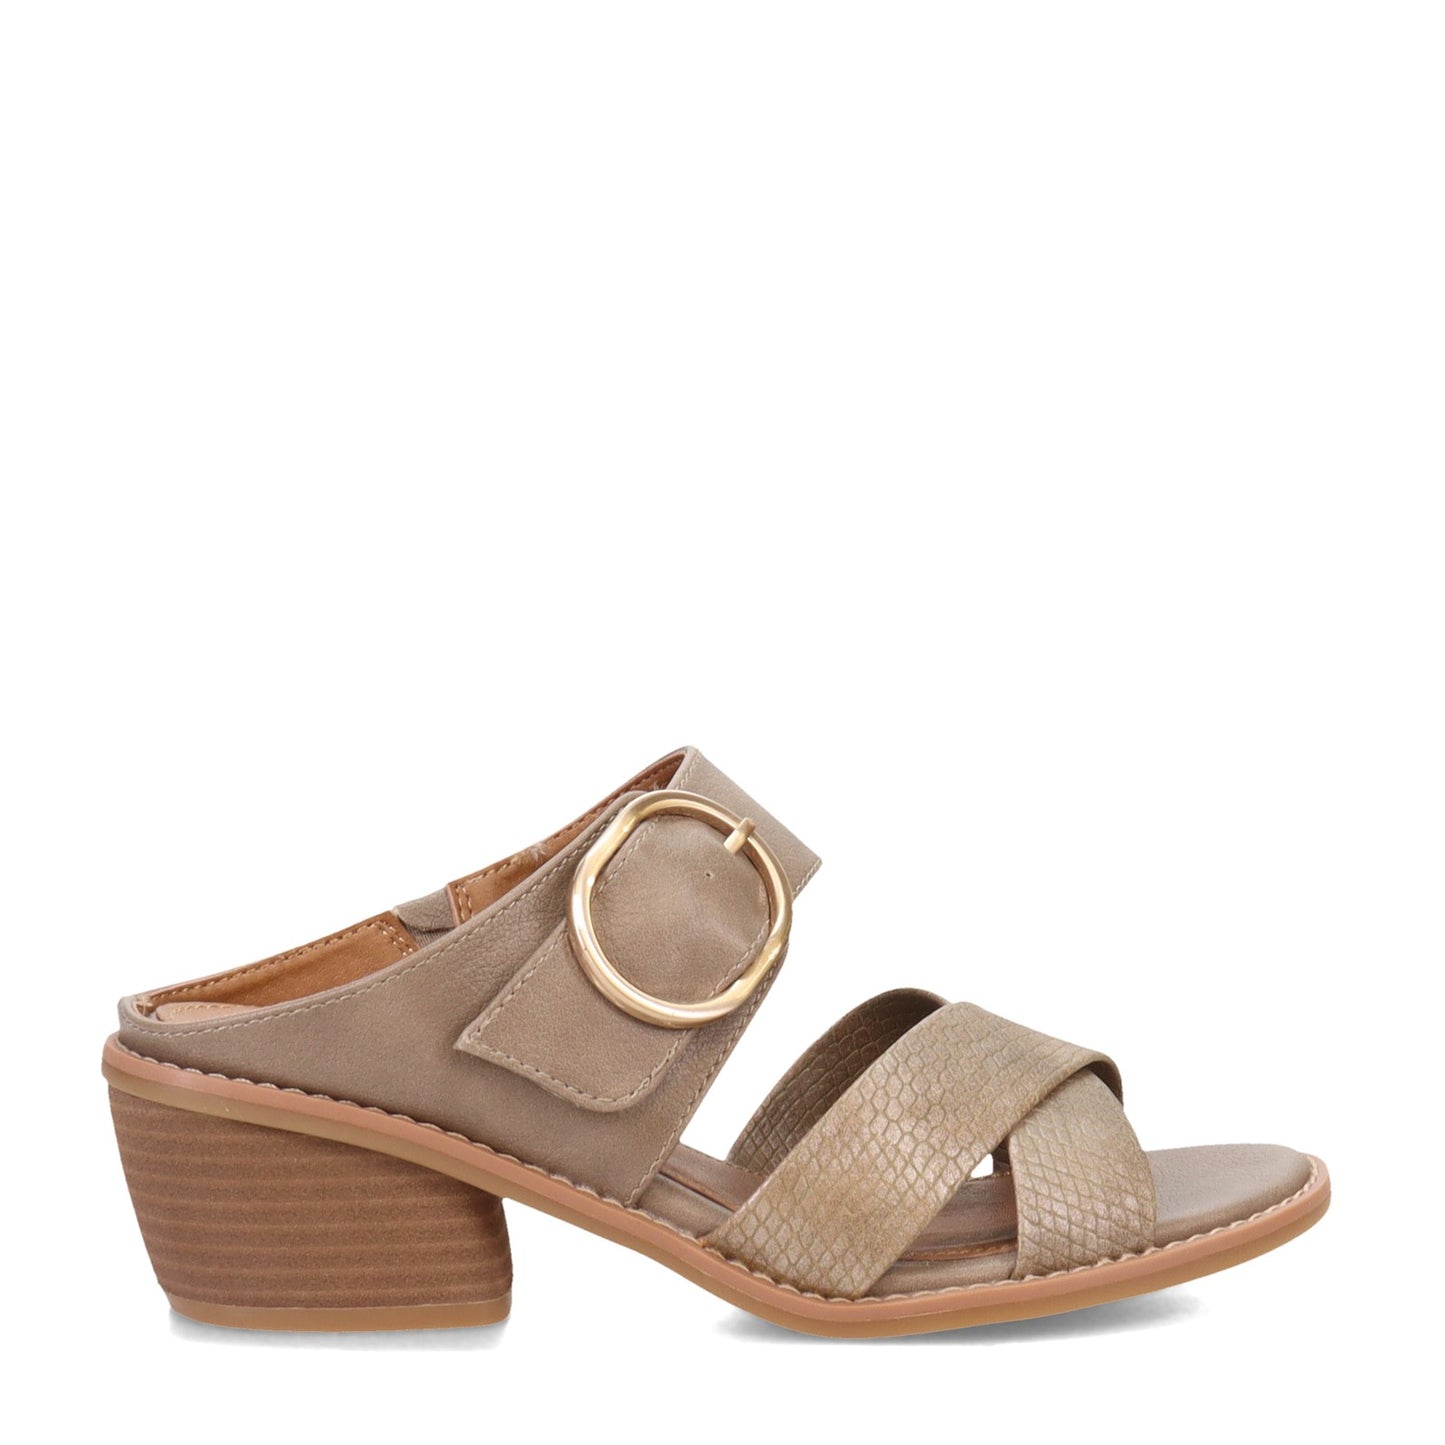 Peltz Shoes  Women's Eurosoft by Sofft Cyleigh Sandal TAUPE ES0035136